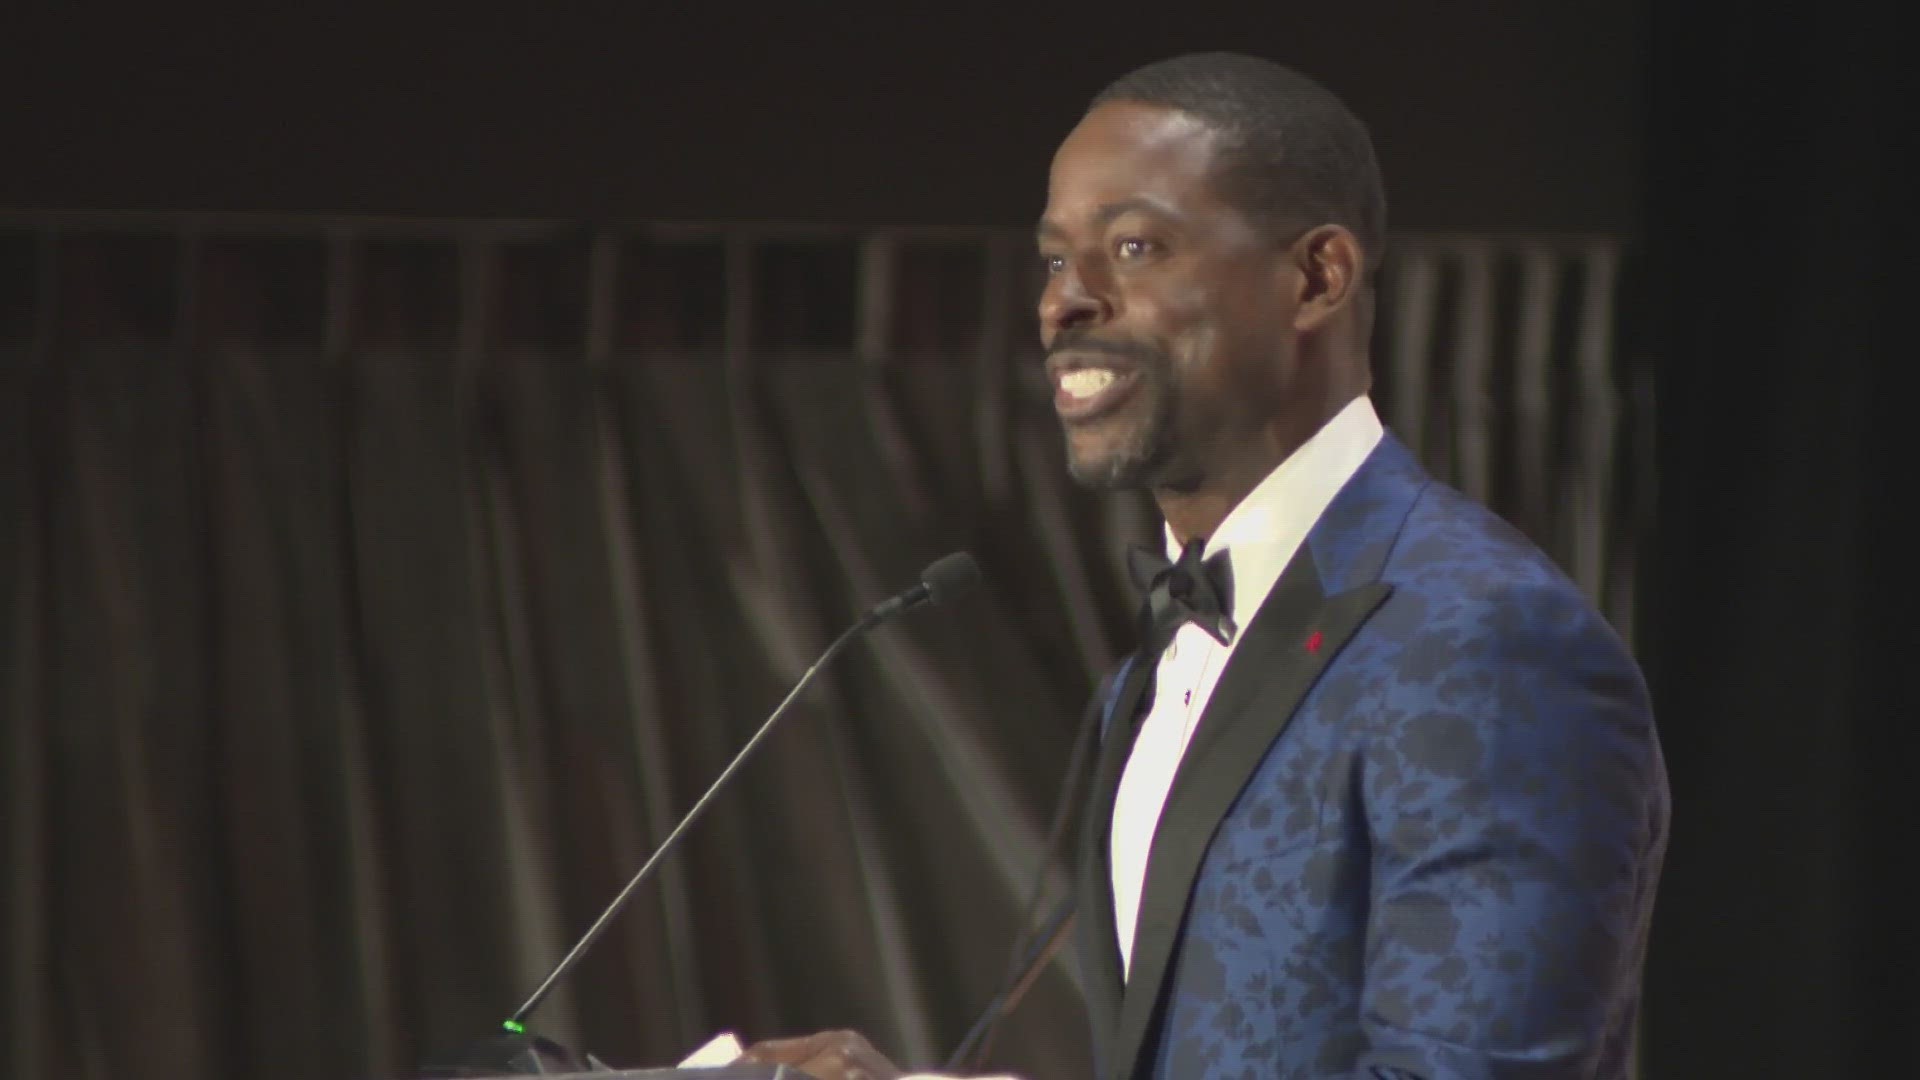 Sterling K. Brown will be the 2023 commencement speaker at WashU. The St. Louis native will also receive an honorary doctor of fine arts degree from the university.